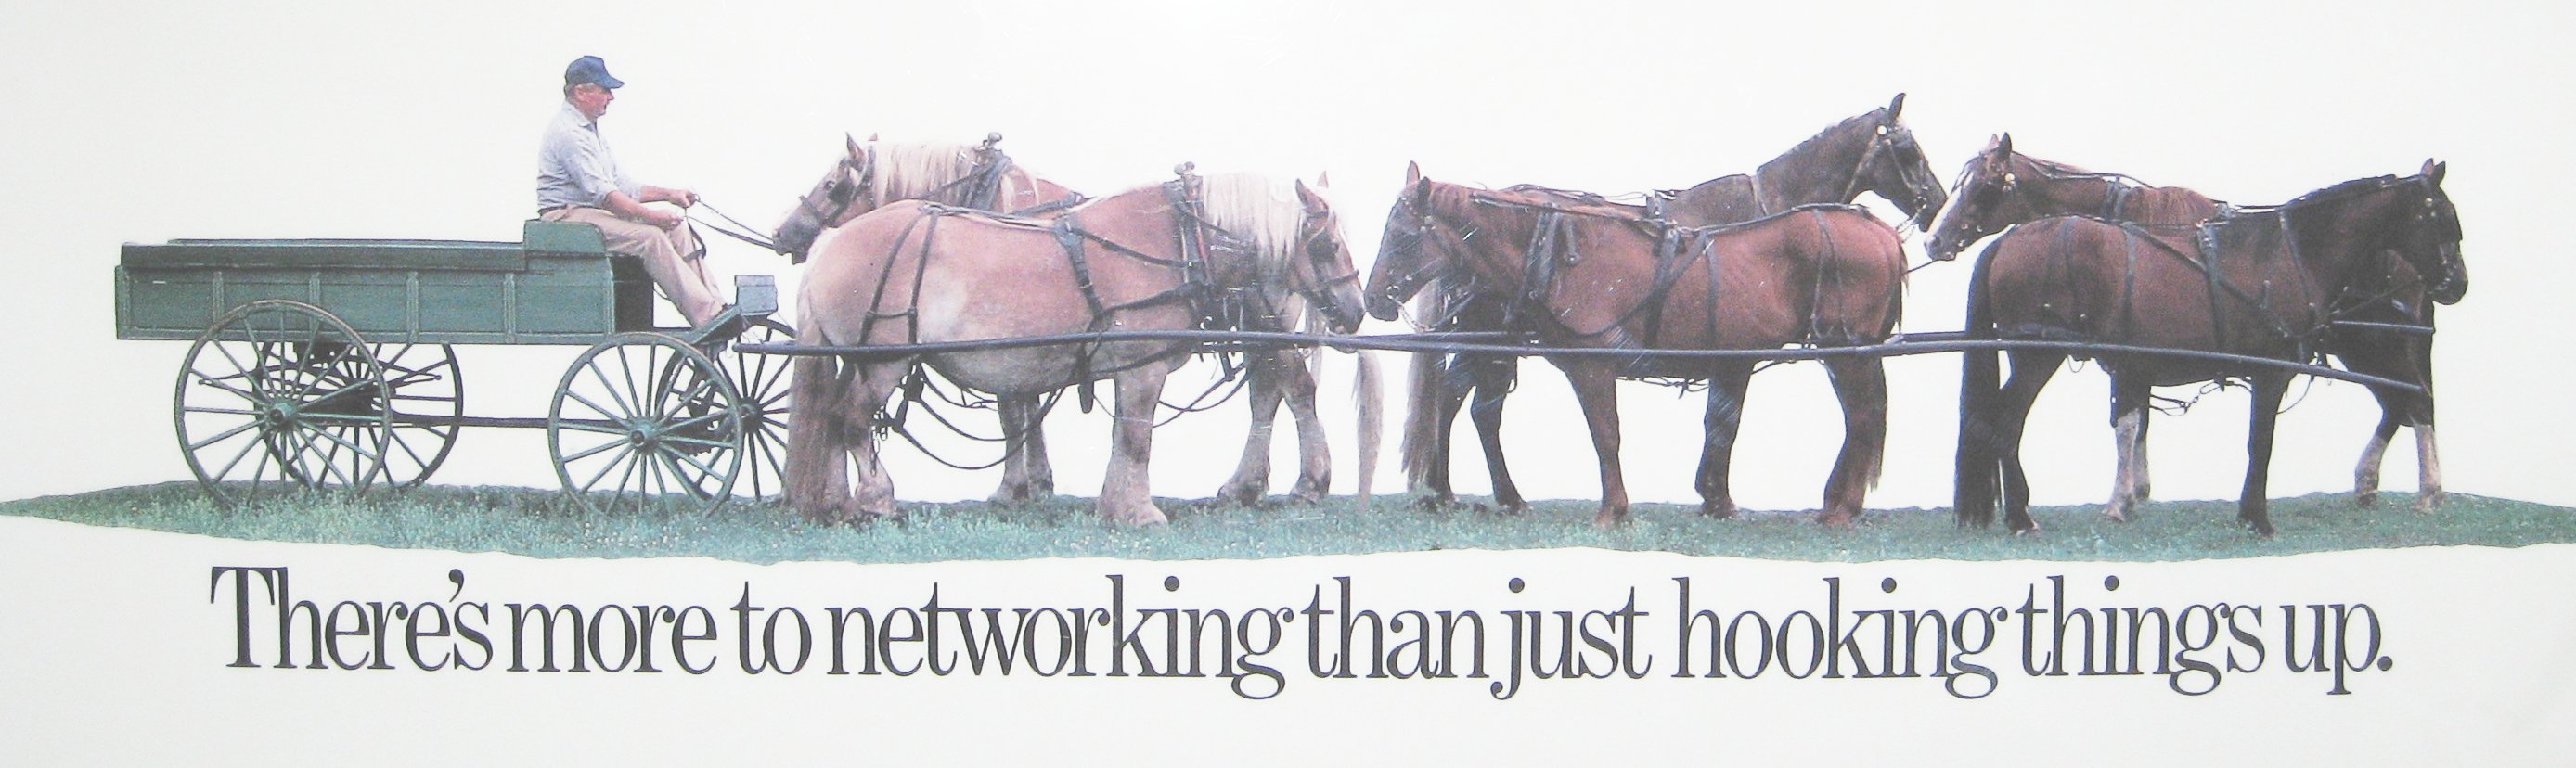 There is more to networking than just hooking things up